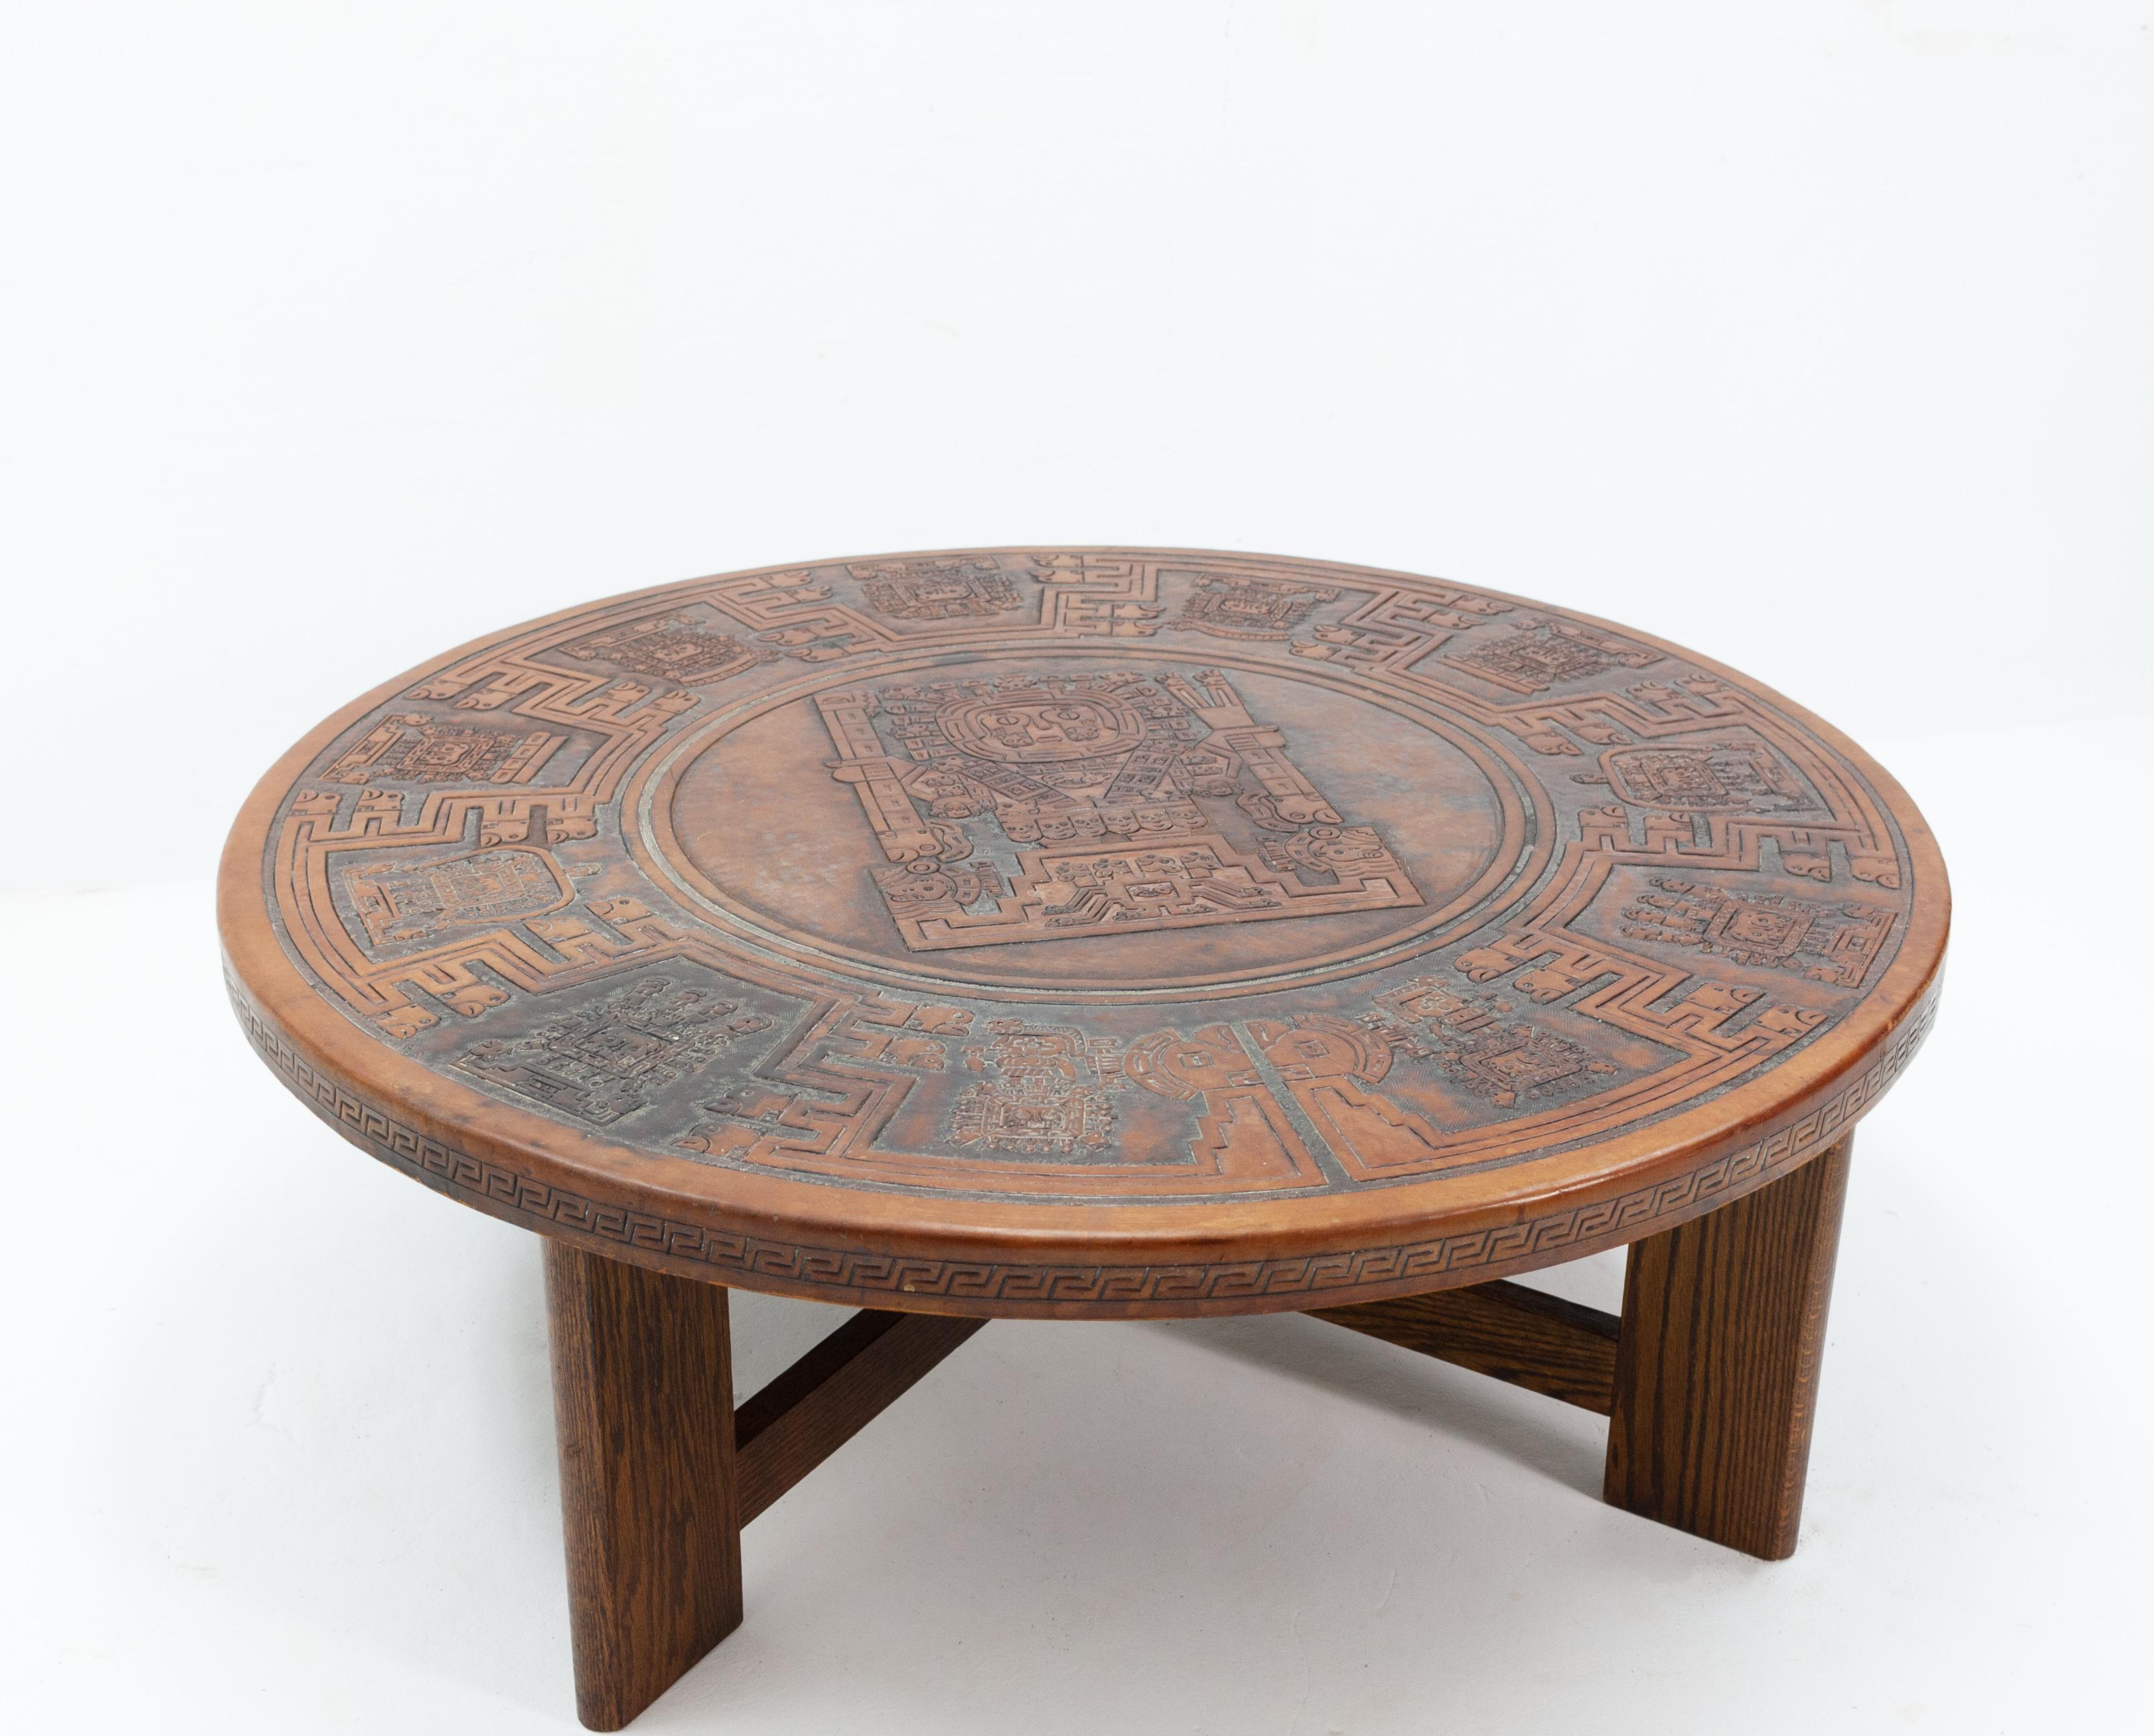 Vintage coffee table .Comes with a beautiful embossed leather top . Pictured a Indian Inca scene .
Standing on a solid oak feet . 1970s .Good condition .
            Angel I. Pazmino - Muebles De Estilo - Coffee table 
Ecuador - 1950-1974 -  



